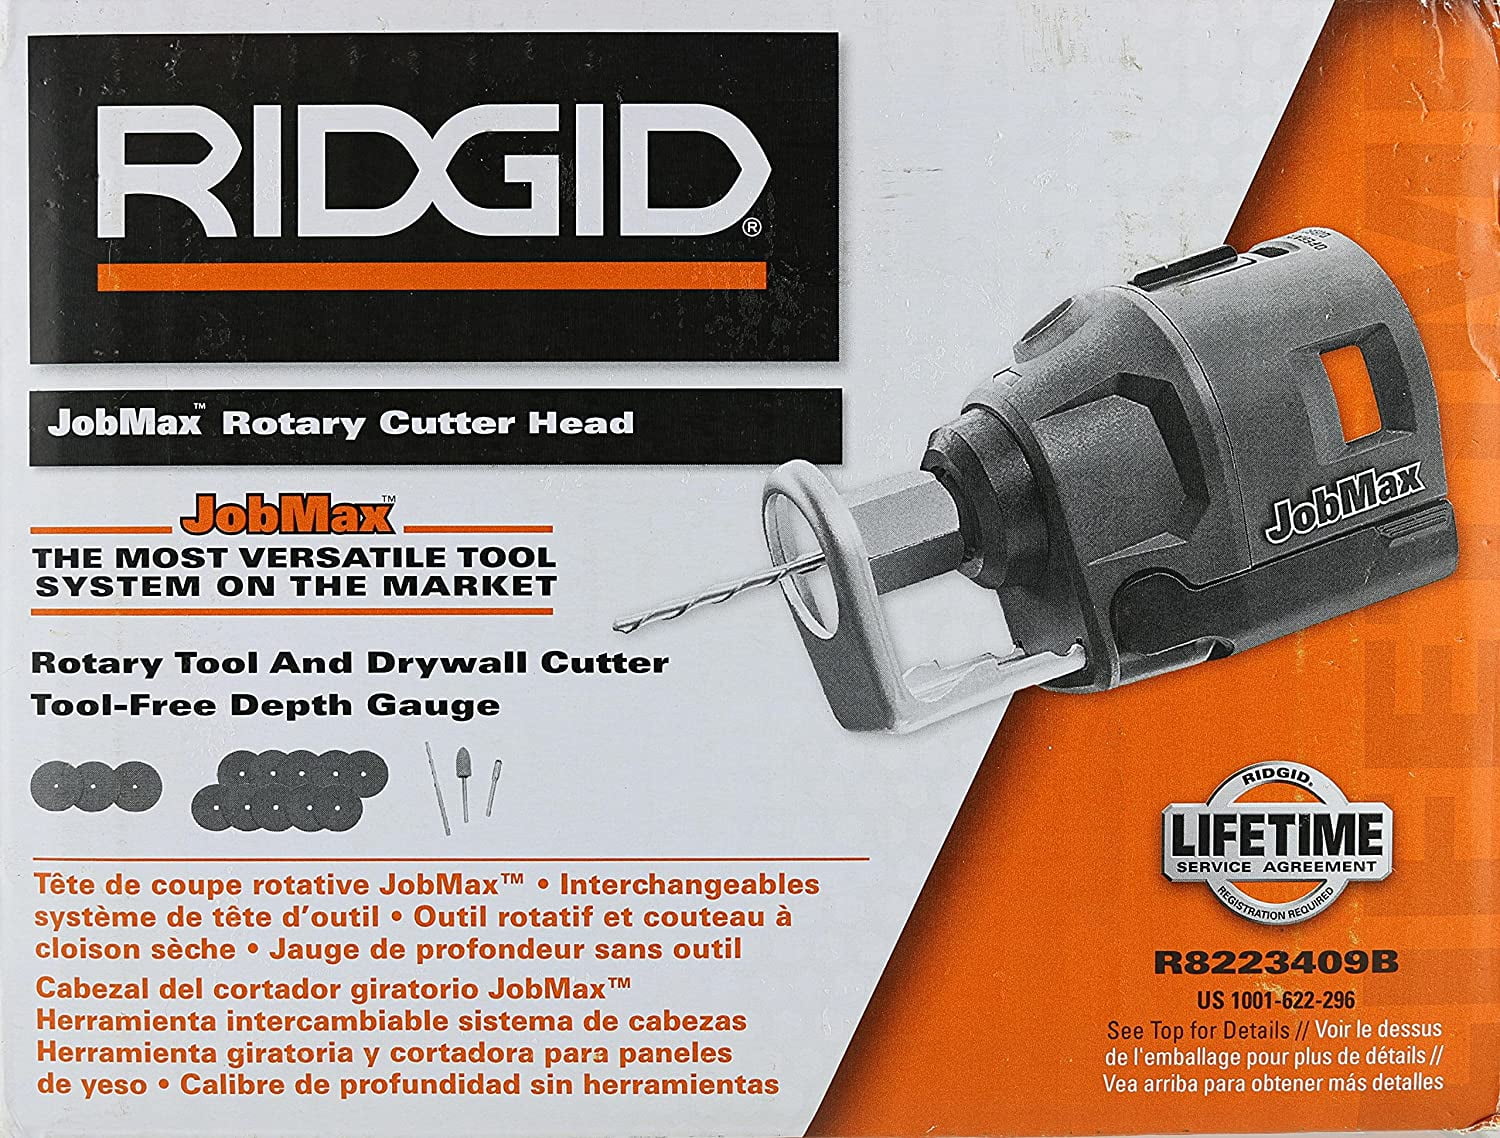 Ridgid R8223409B JobMax Rotary Cutter Head with Included Drywall Cutter Bit  (JobMax Base Not Included, Head Only) By Visit the Ridgid Store -  Walmart.com